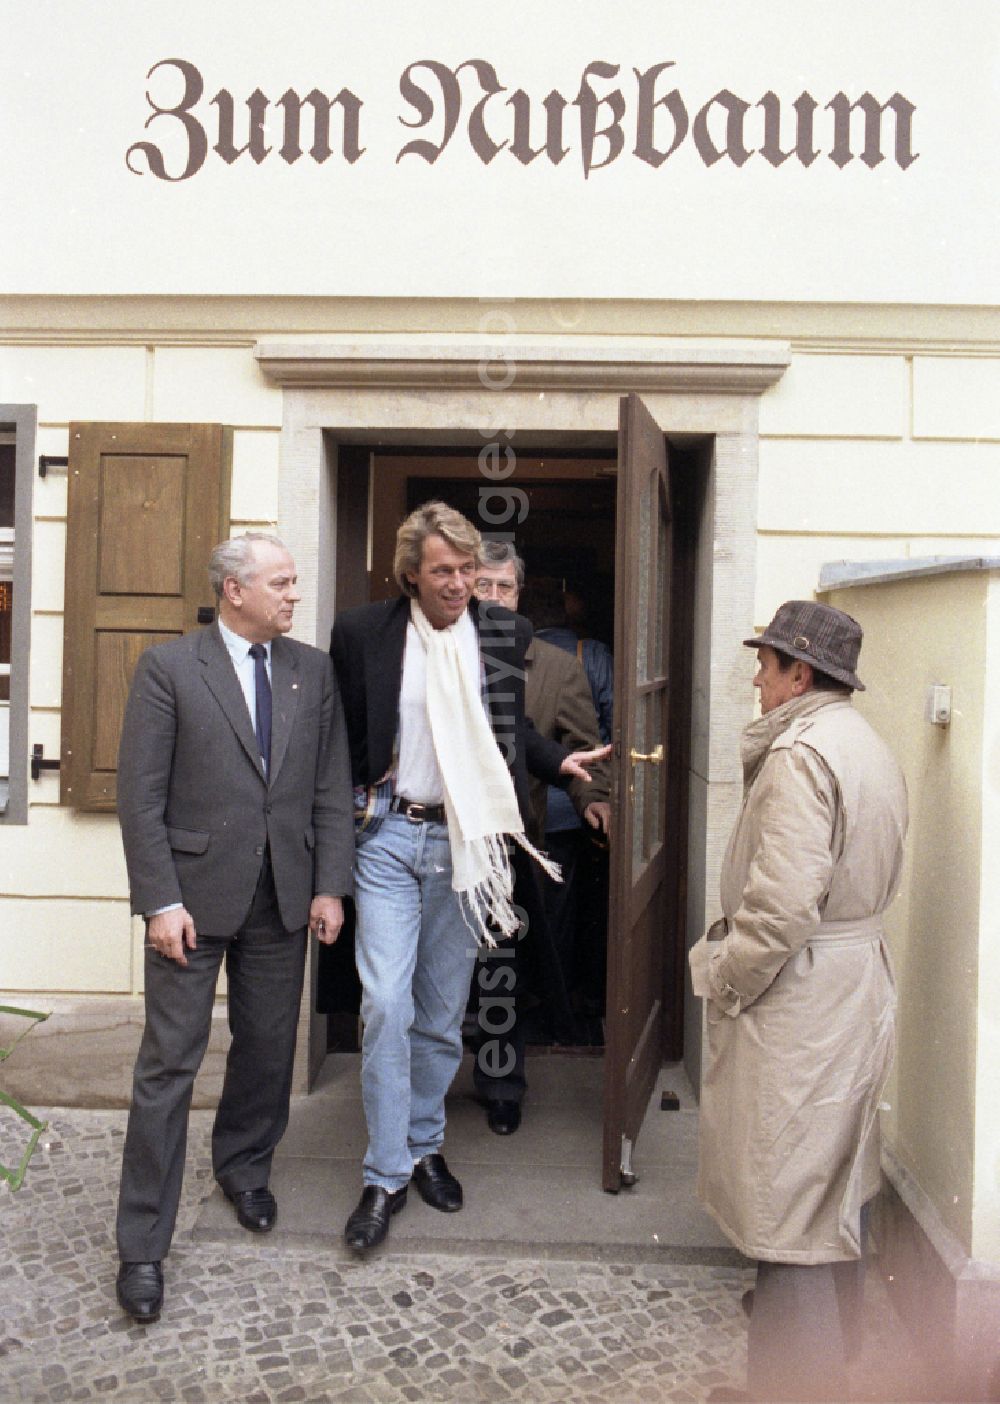 GDR photo archive: Berlin - Singer Roland Kaiser in the Nikolai Quarter in Berlin-Mitte accompanied by Hermann Falk, Director of the Artists' Agency of the GDR